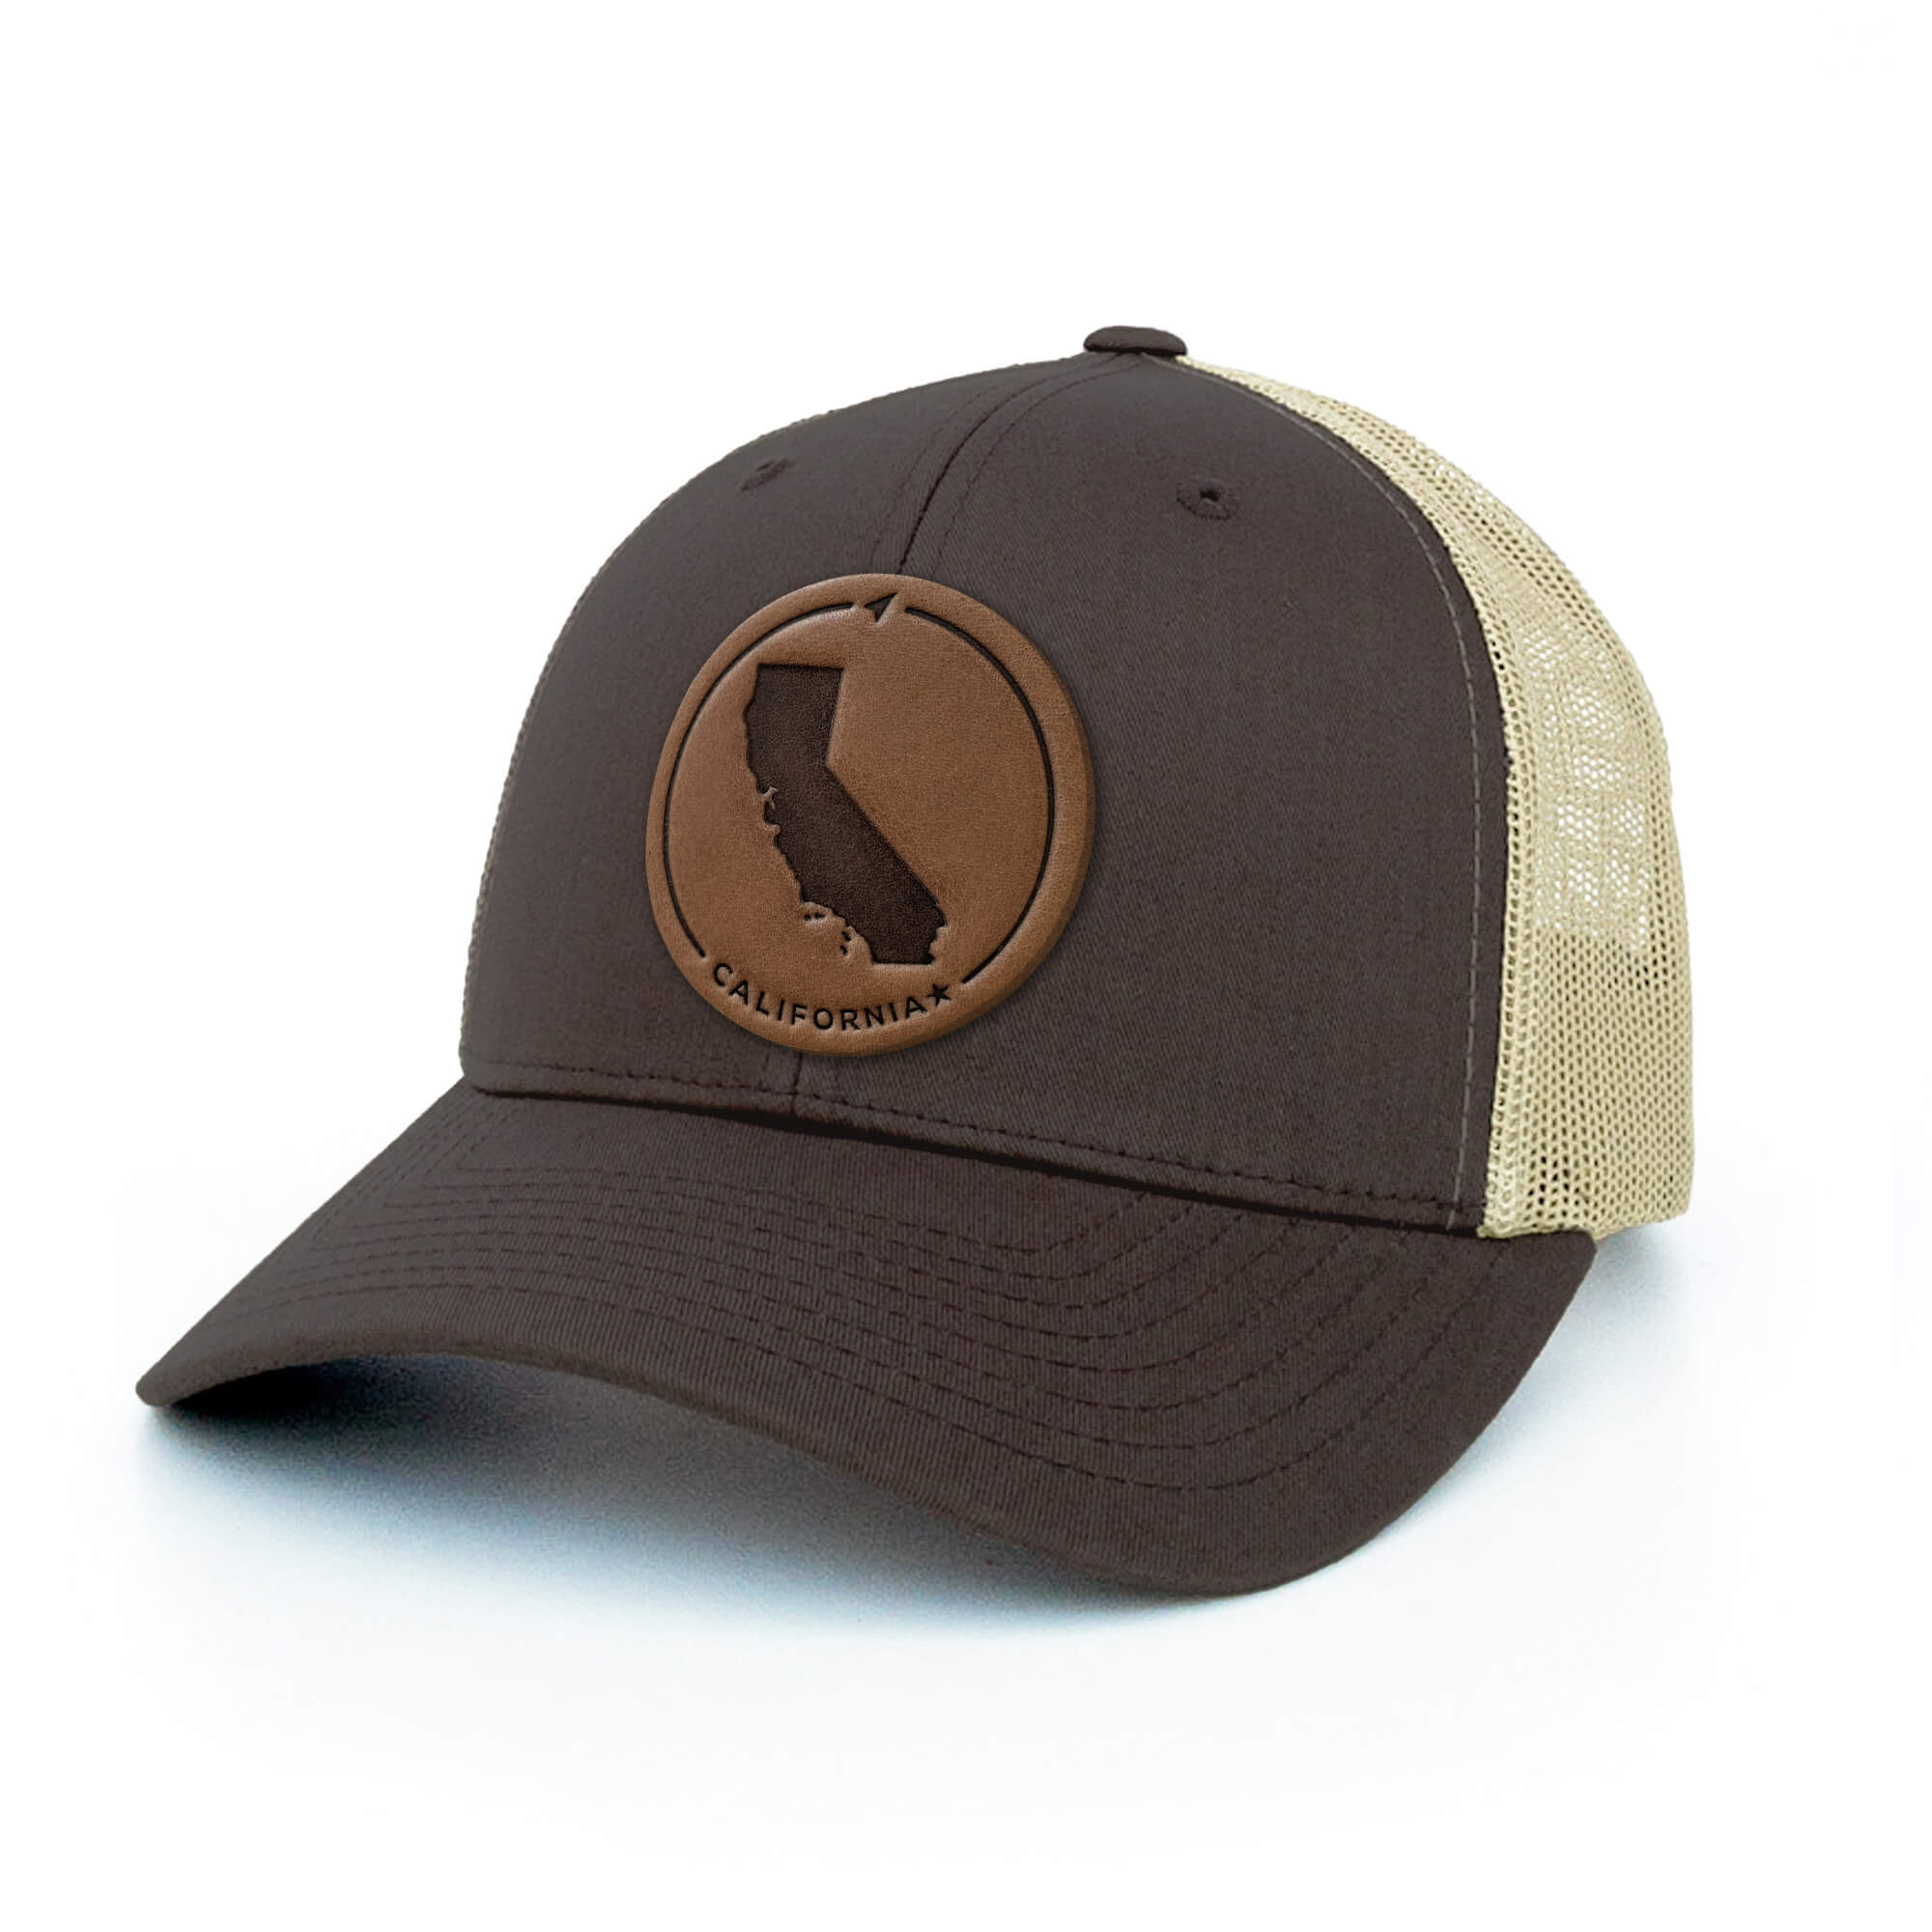 Brown and khaki trucker hat with full-grain leather patch of California | BLACK-003-011, CHARC-003-011, NAVY-003-011, HGREY-003-011, MOSS-003-011, BROWN-003-011